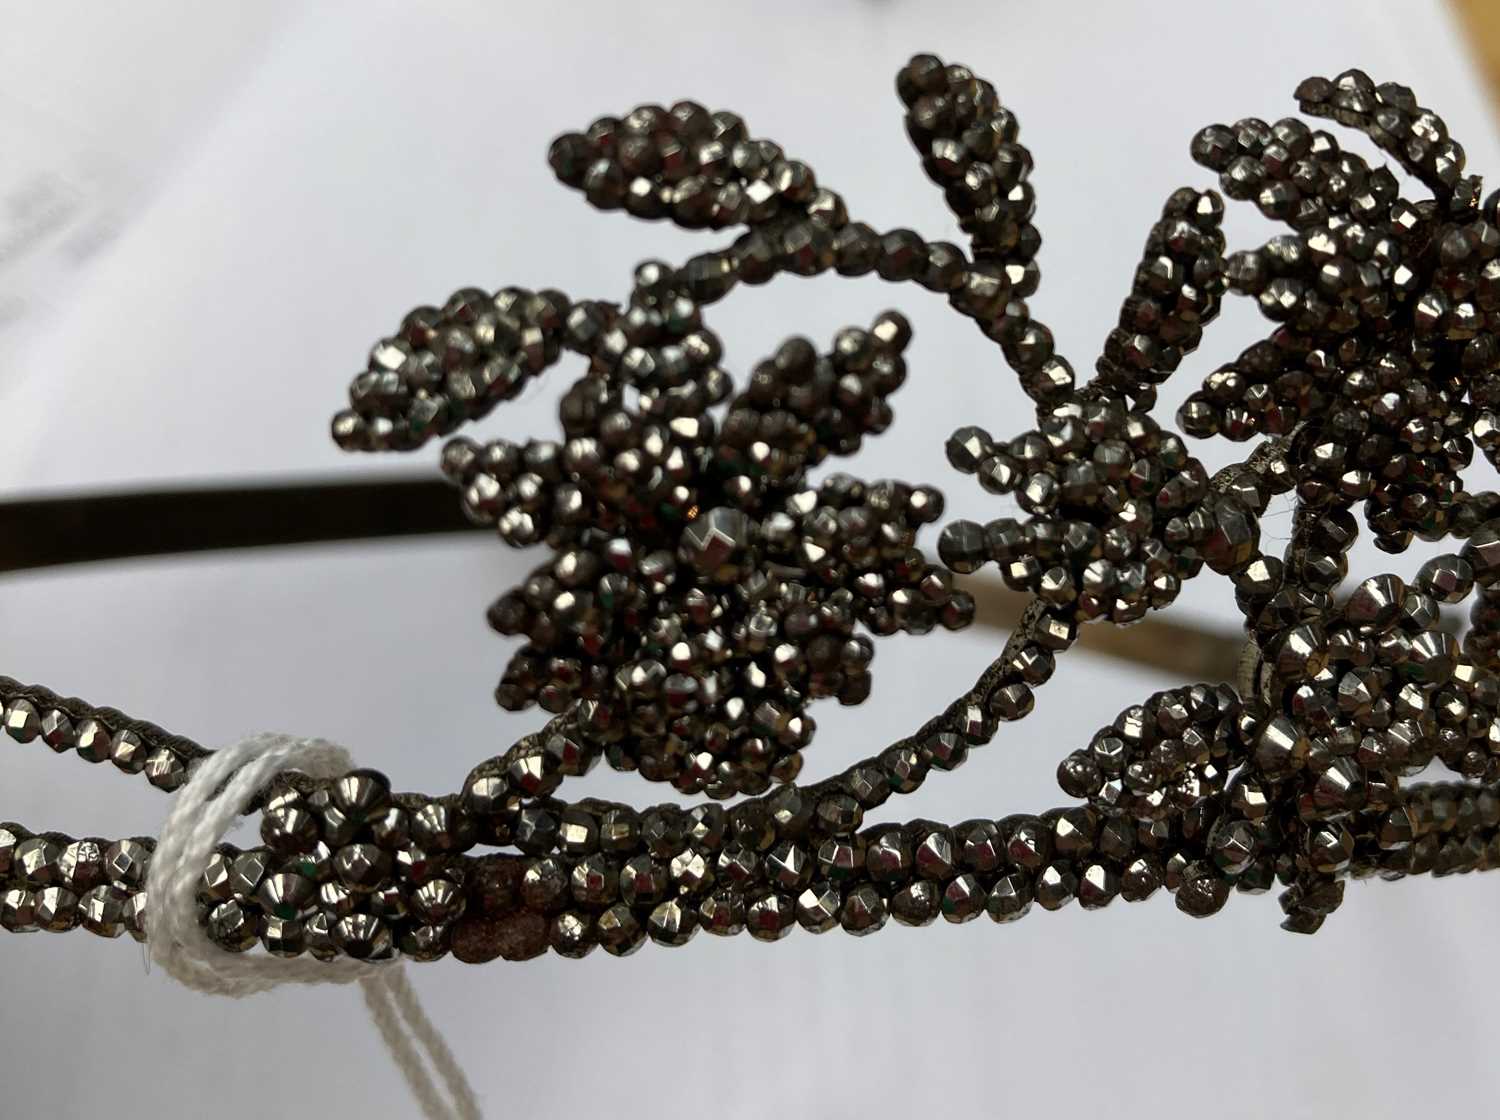 19th Century and Later Cut Steel Jewellery, comprising a decorative tiara with rotating flower heads - Image 17 of 19